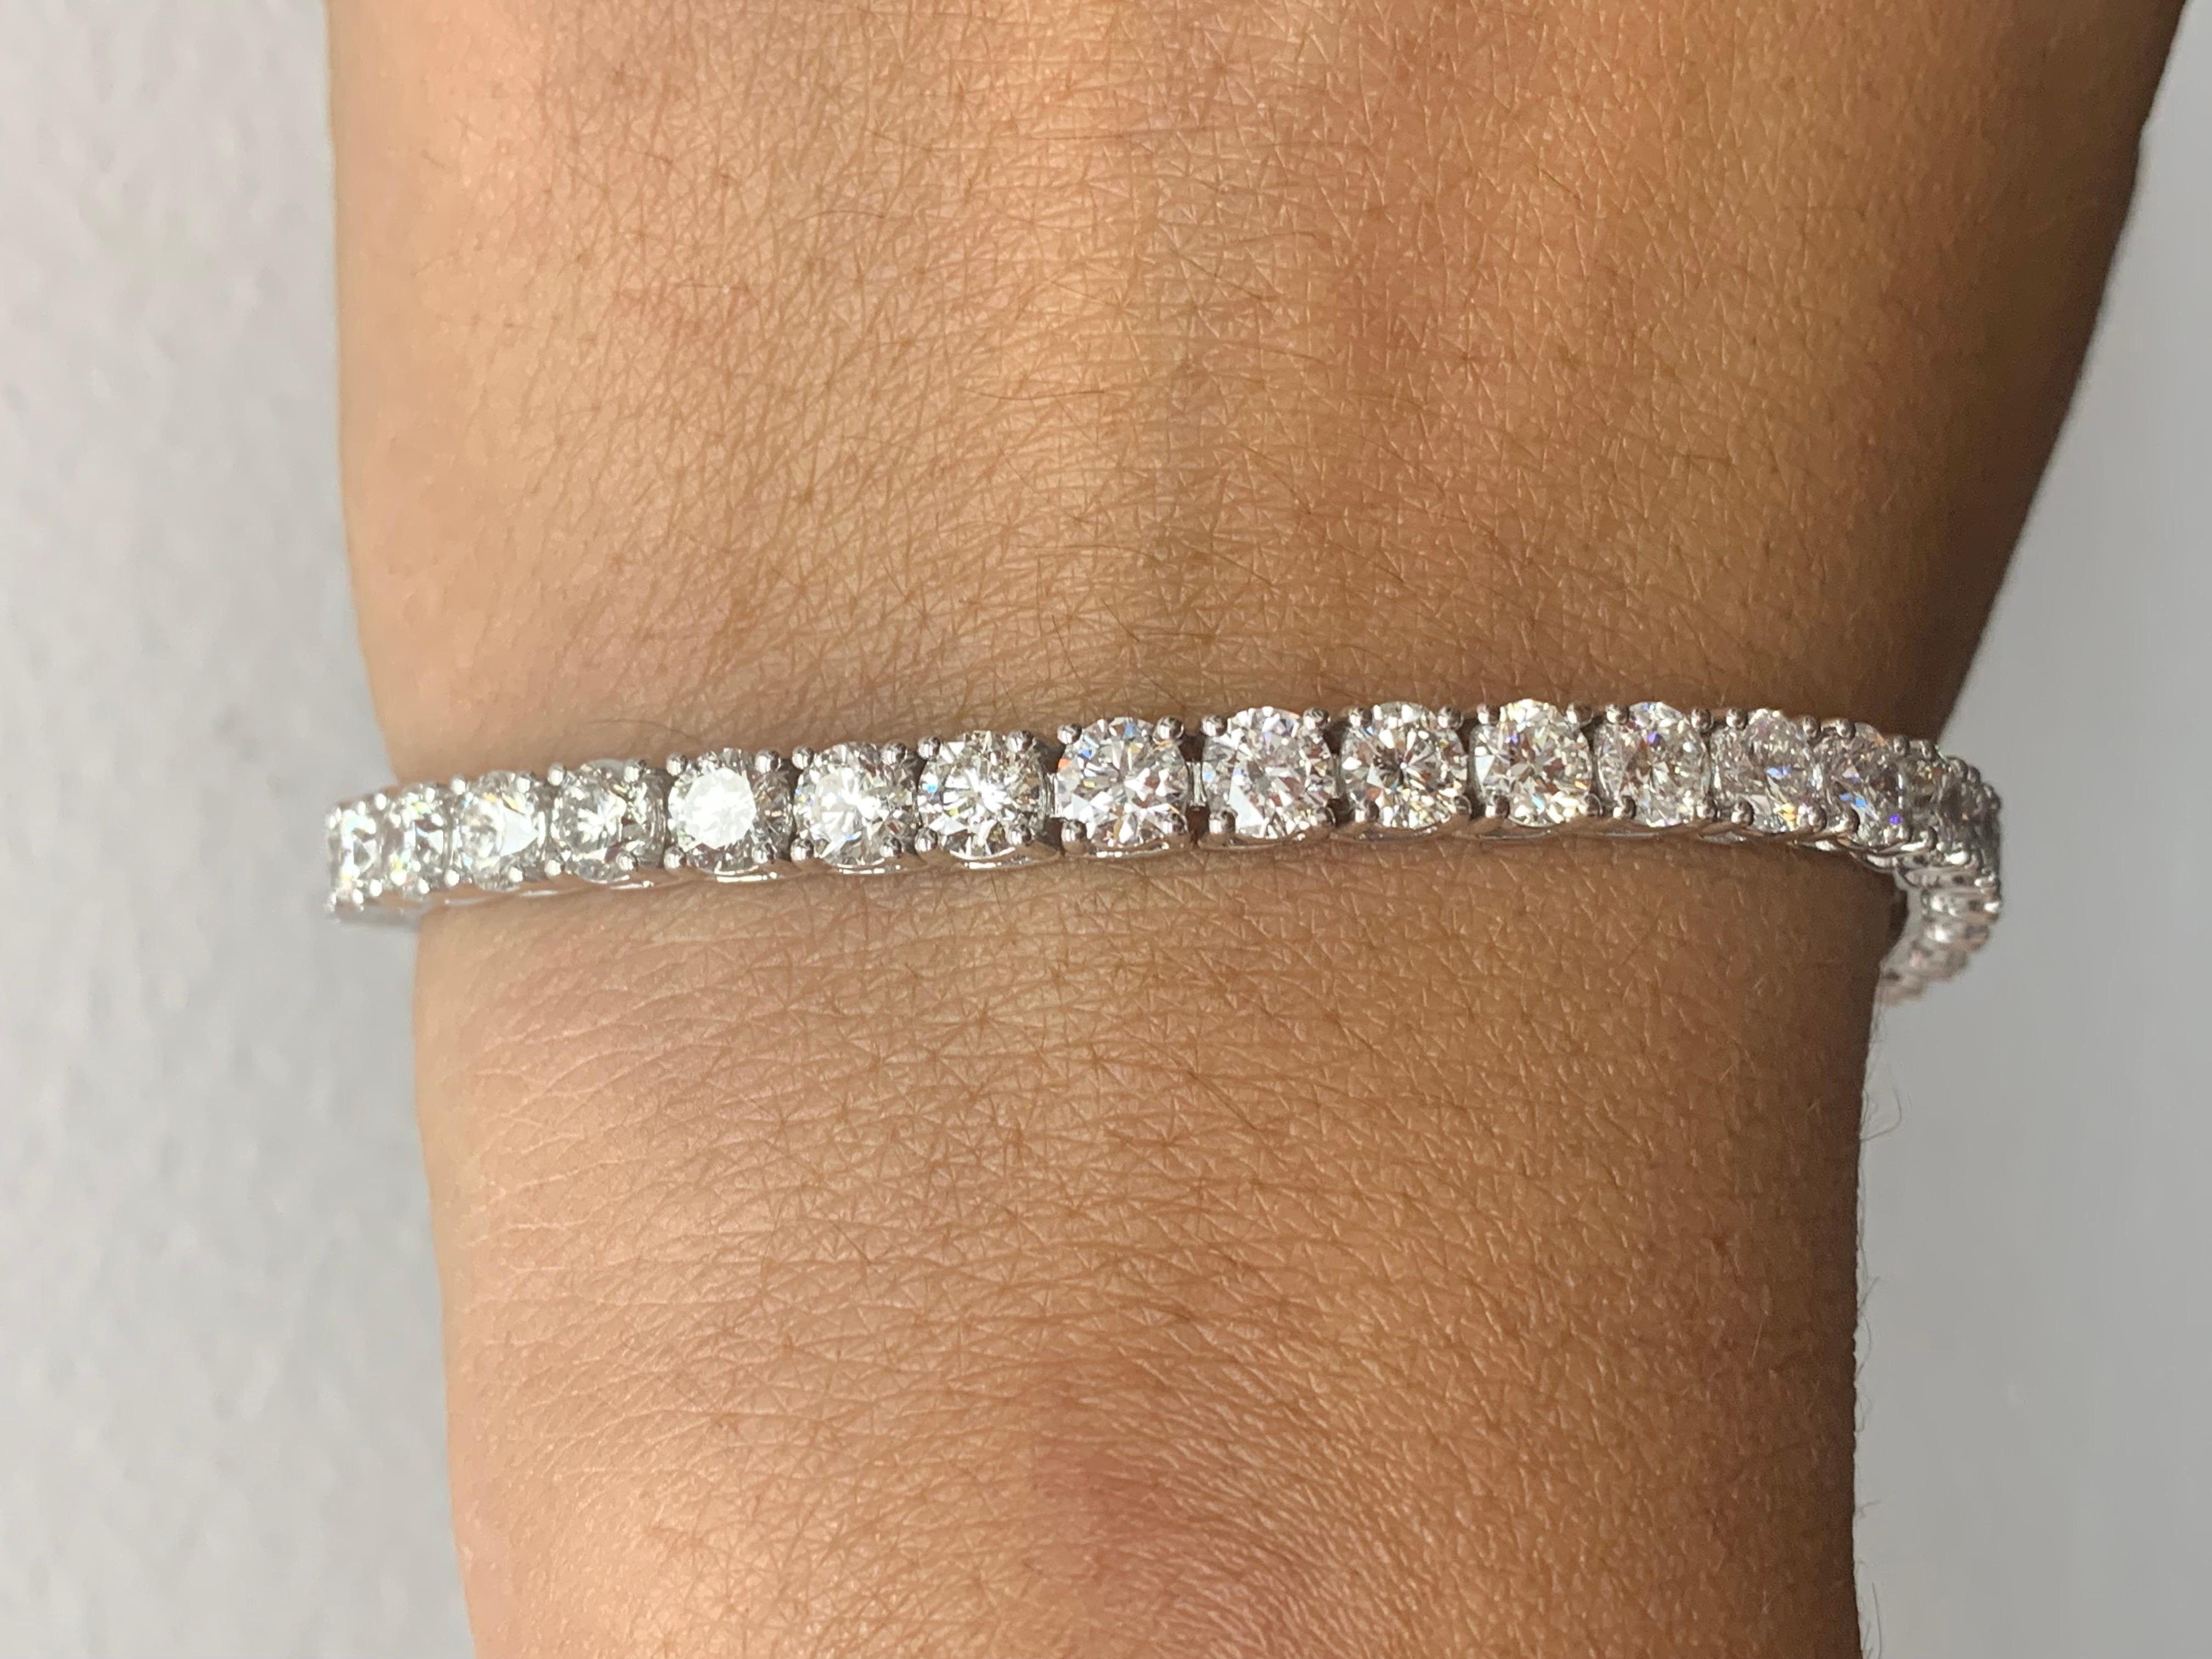 A classic tennis bracelet style is showcasing a row of round brilliant diamonds, set in a polished 14k white gold mounting. 39 Diamonds weigh 12.01 carats and are approximately GH color, SI1 clarity.

Style is available in different price ranges.